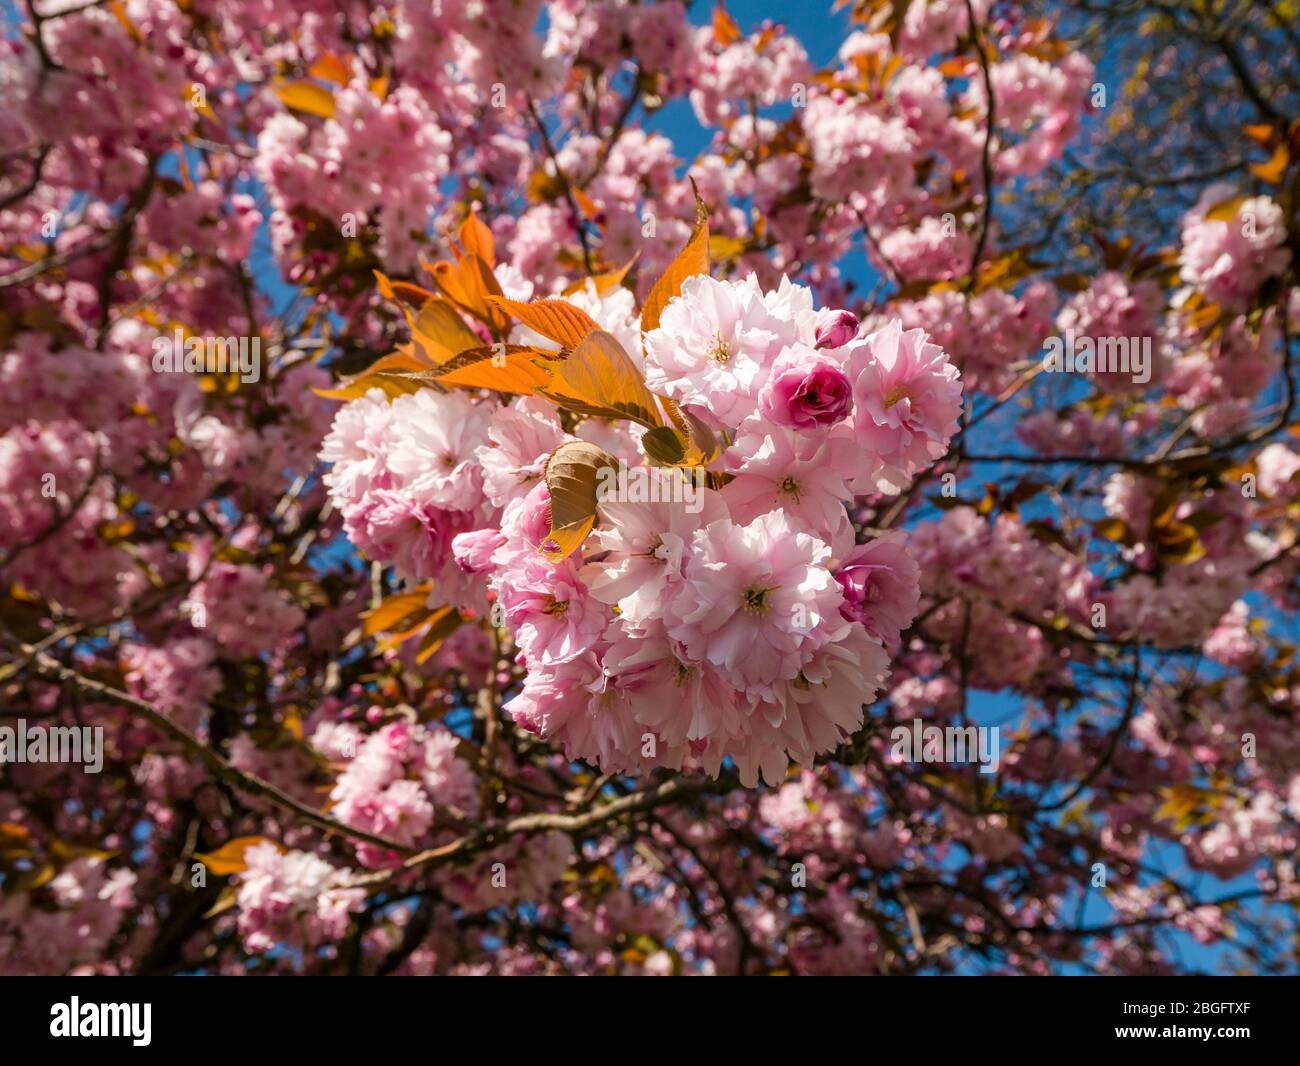 East Lothian, Scotland, United Kingdom, 21st April 2020. UK Weather: a cherry tree in full bloom with pink blossom in bright sunny Spring weather Stock Photo